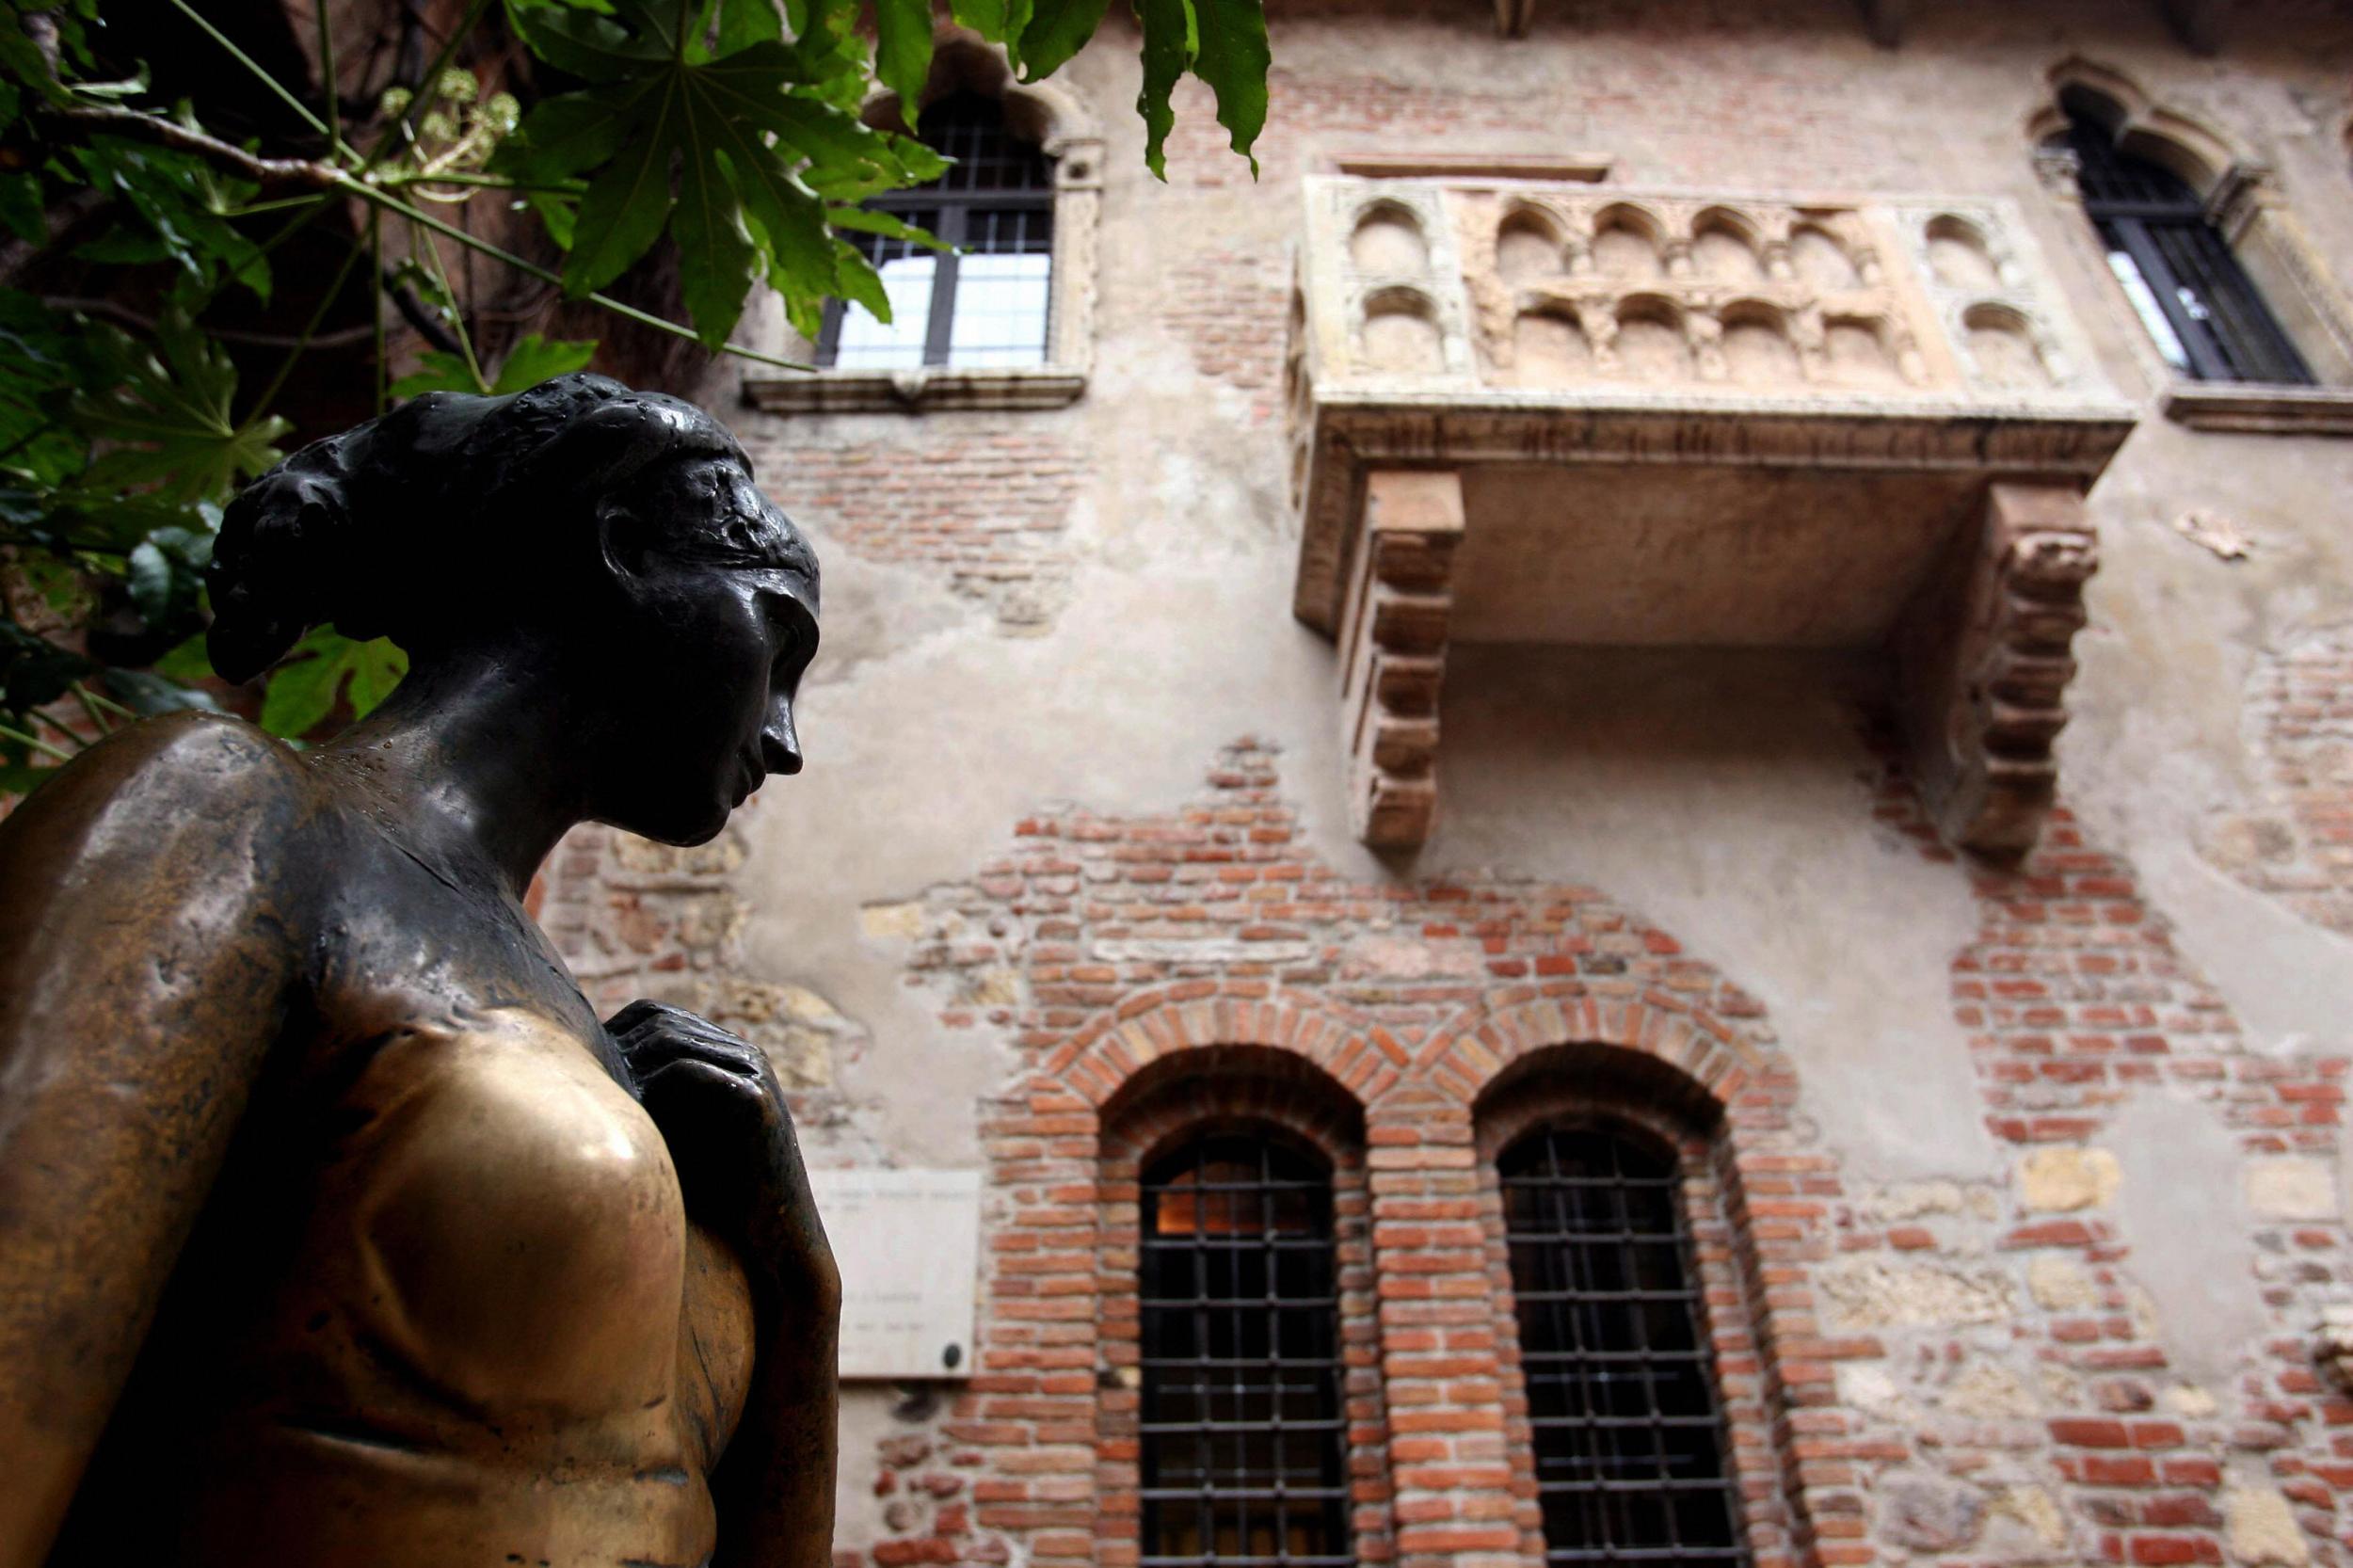 Juliet's House, with the bronze statue of Juliet in front, is a big favourite with visitors